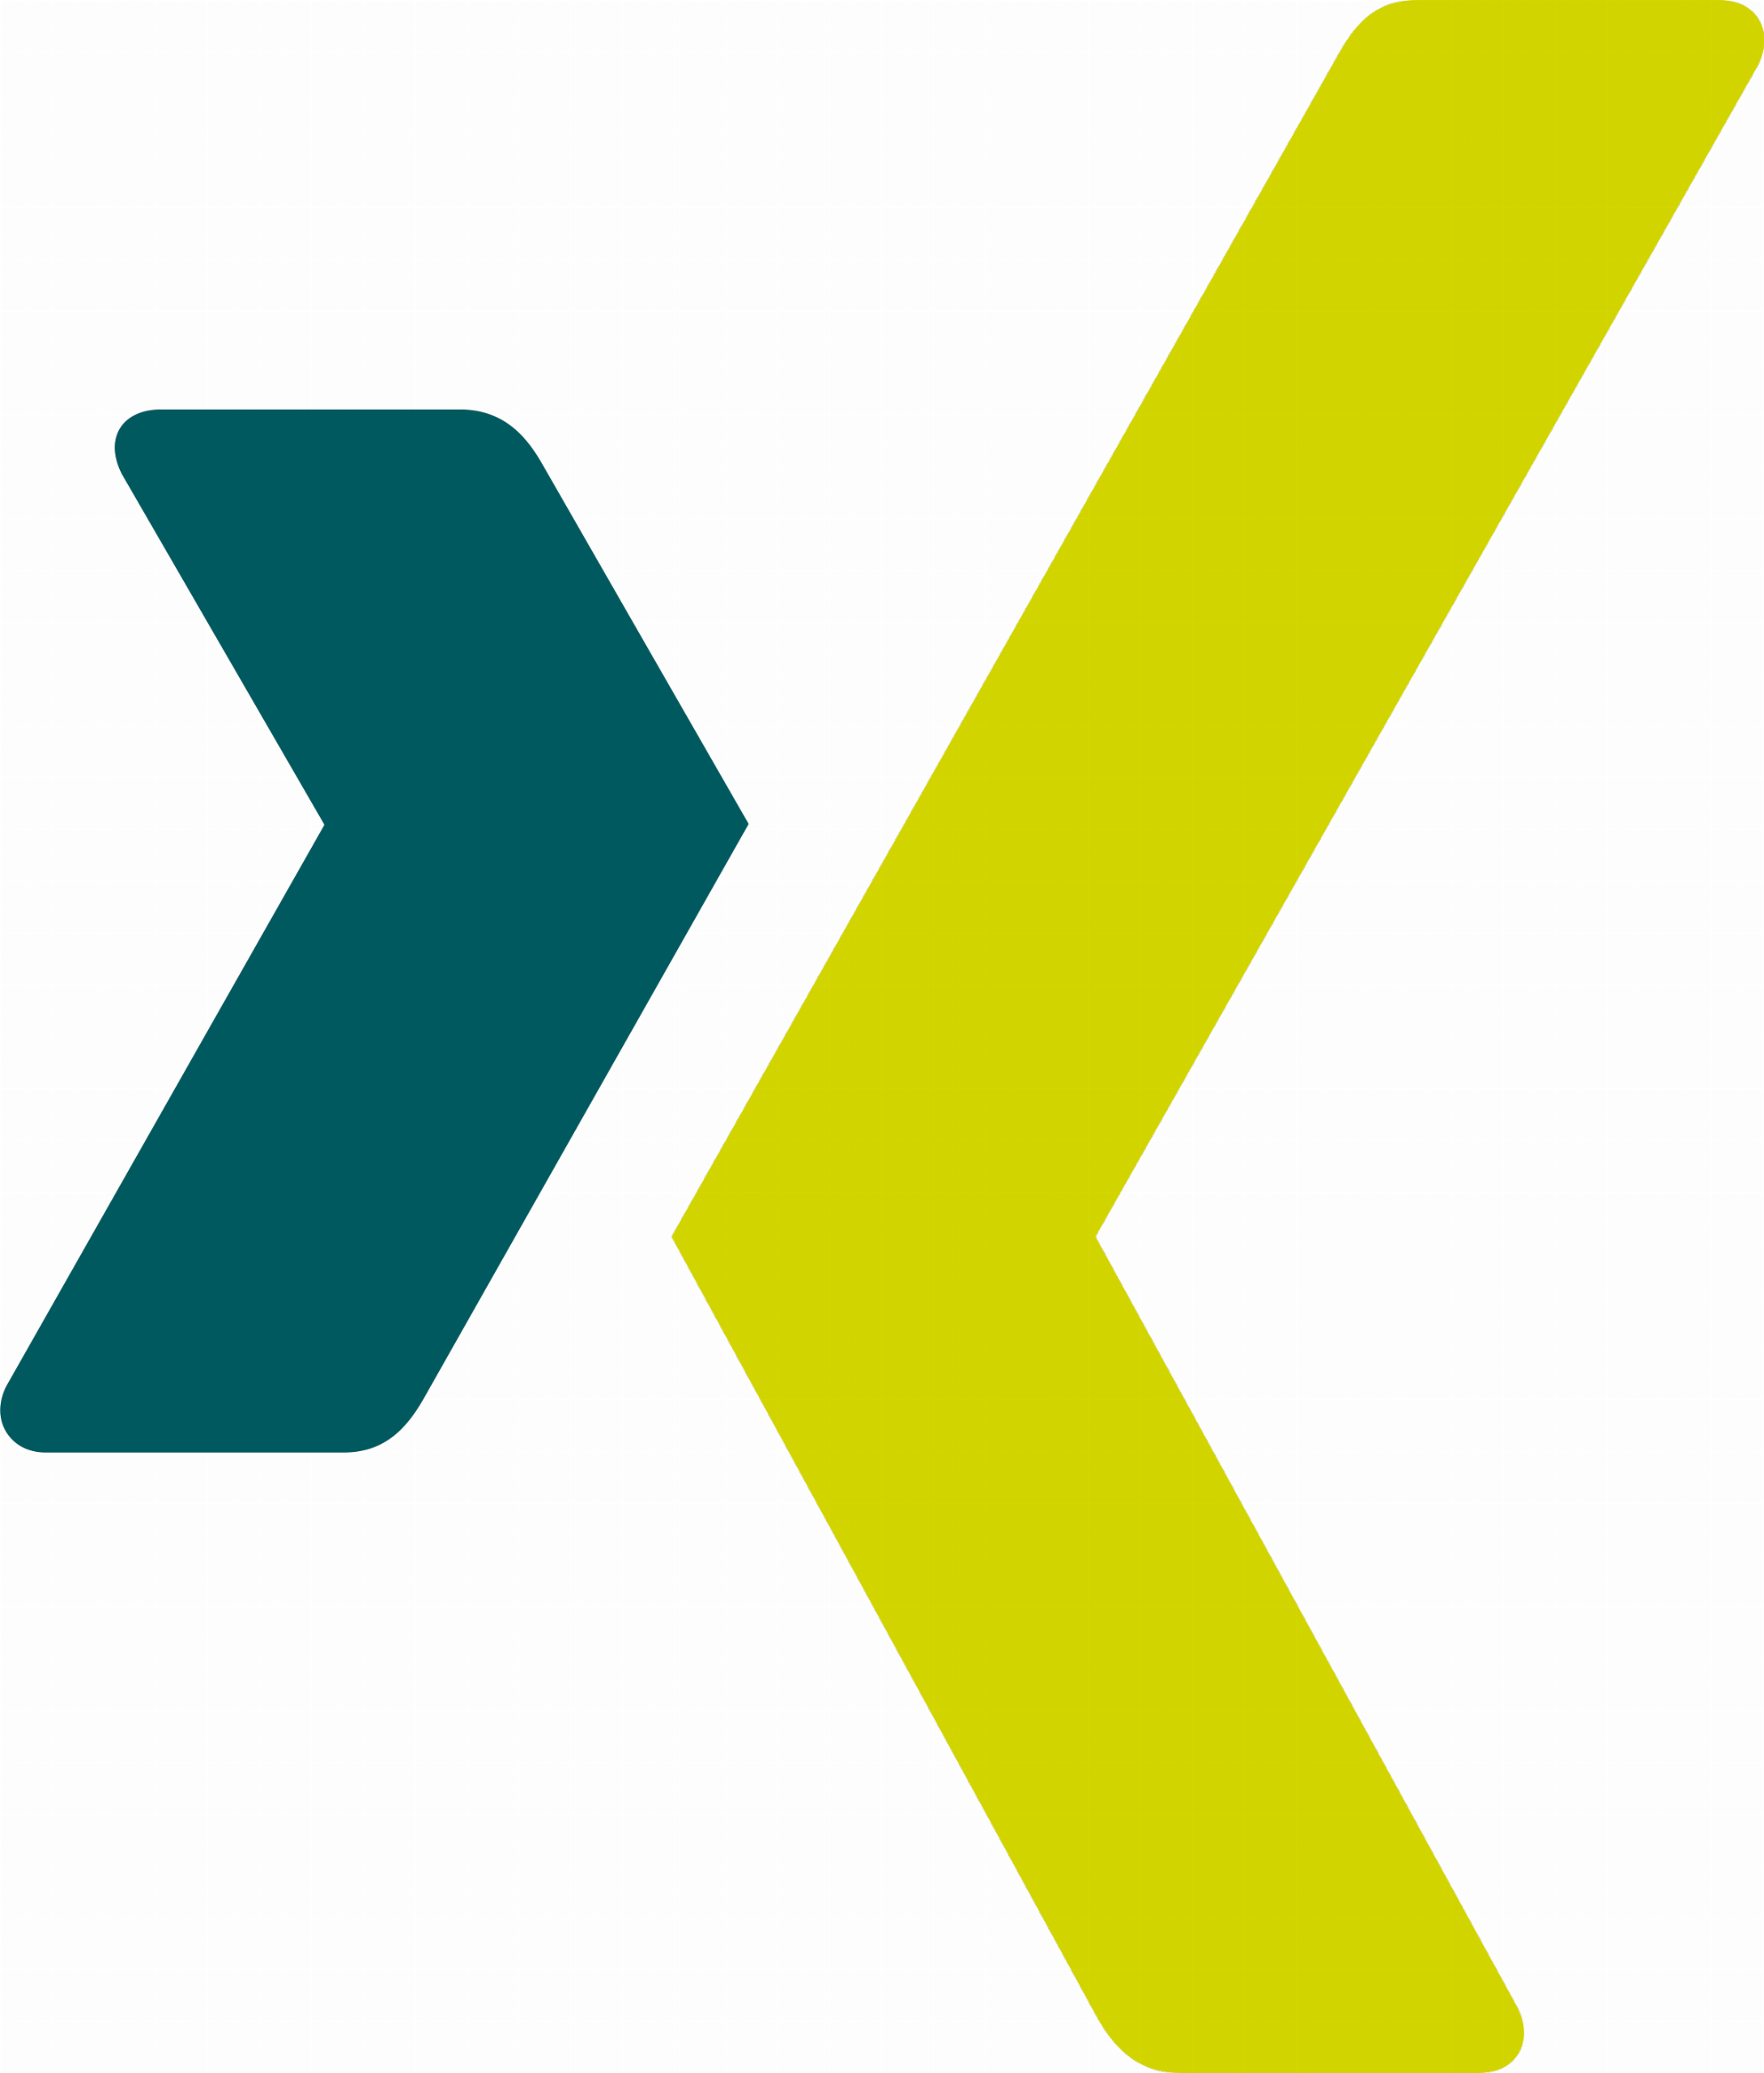 xing-icon-logo-png-transparent.png